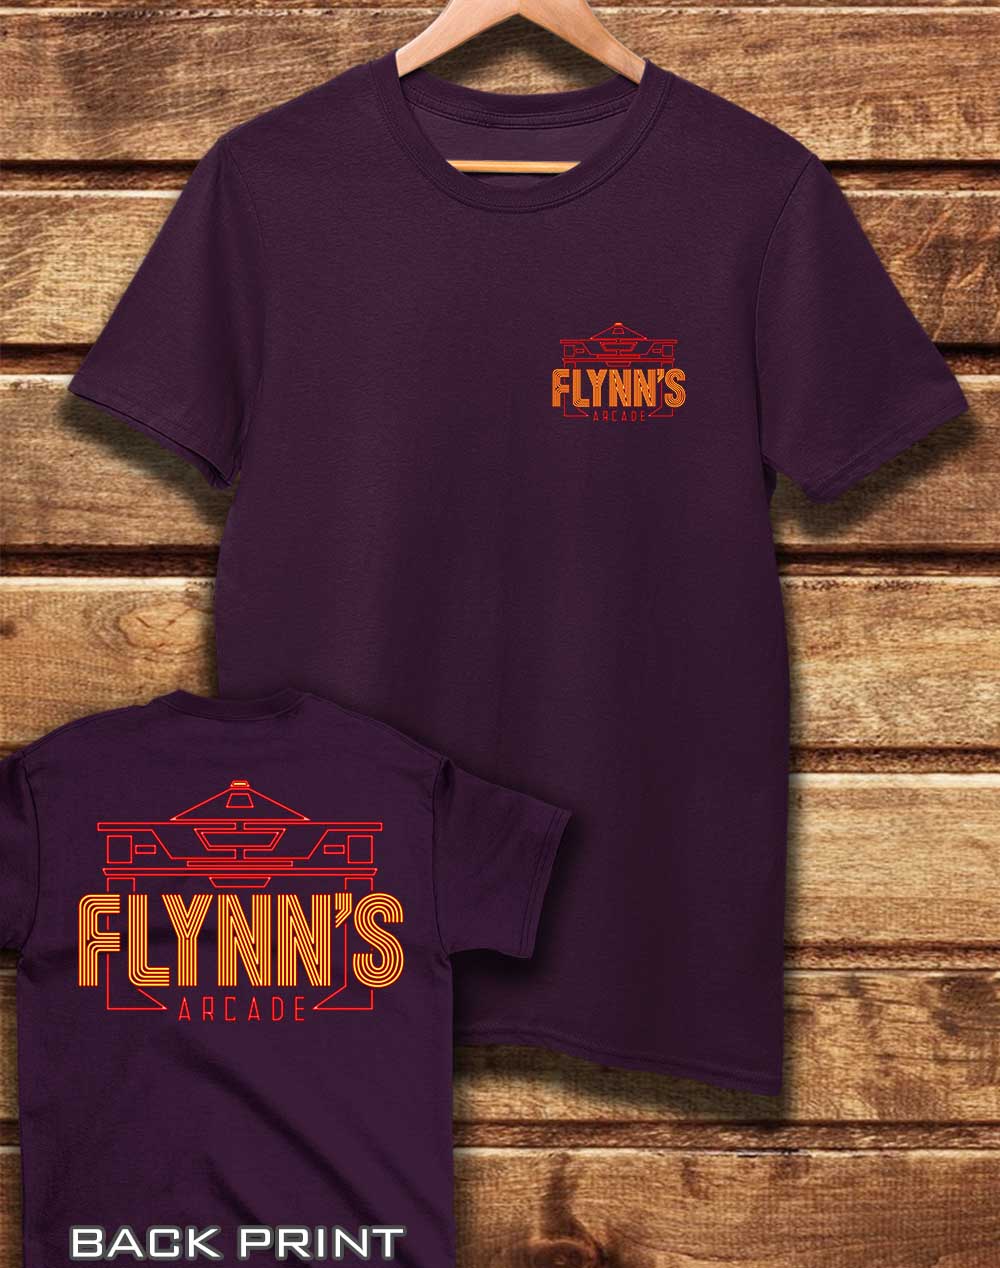 Eggplant - DELUXE Flynn's Arcade with Back Print Organic Cotton T-Shirt